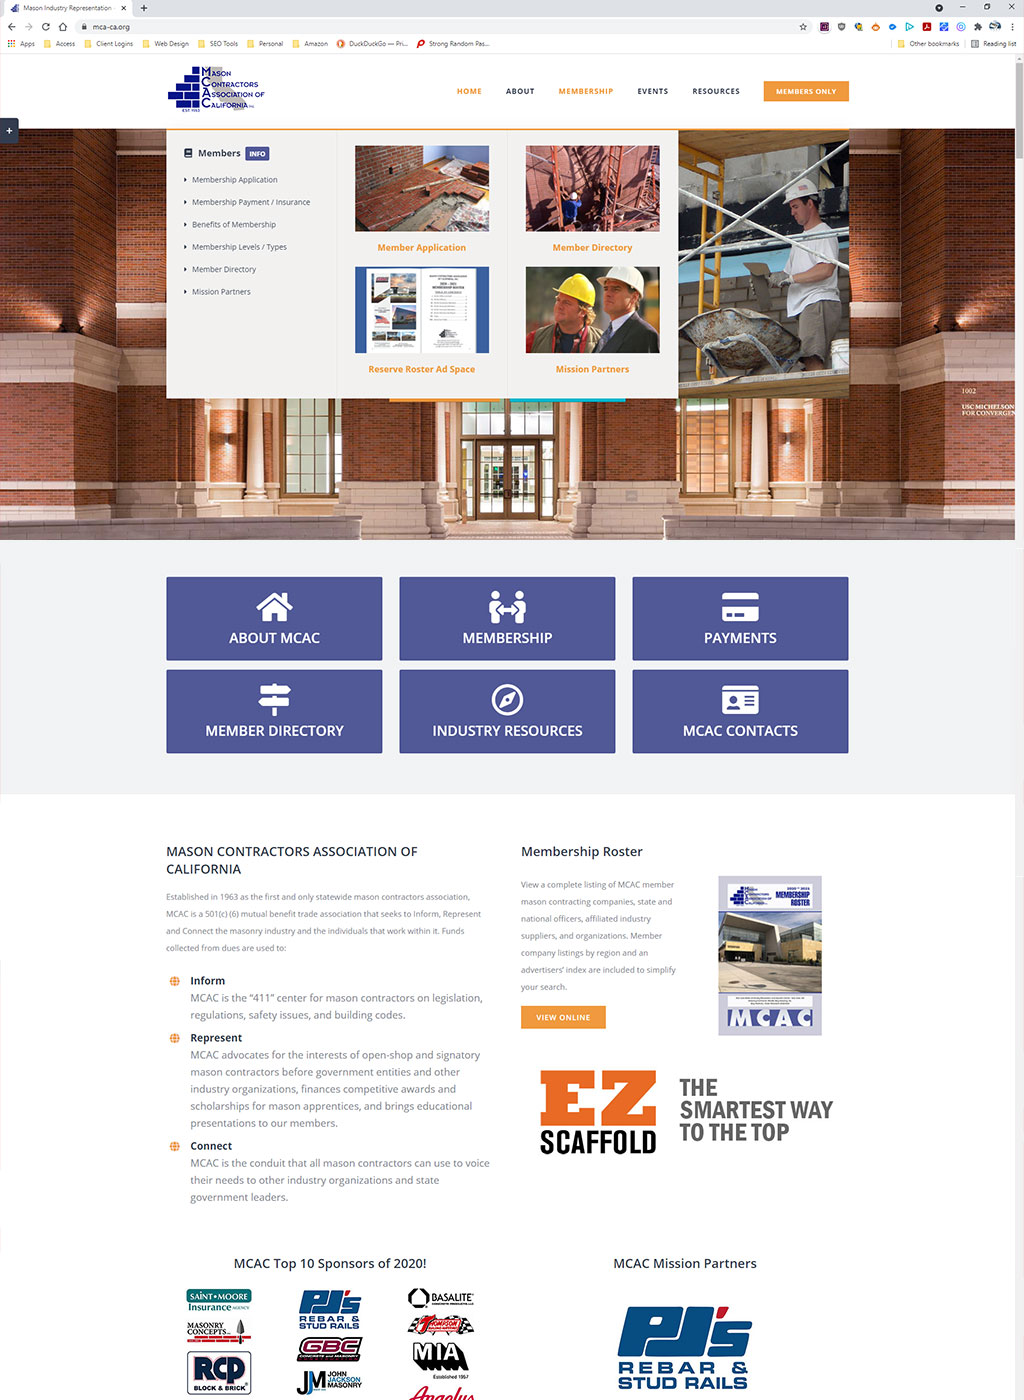 Website developed for the Mason Contractors Association of California